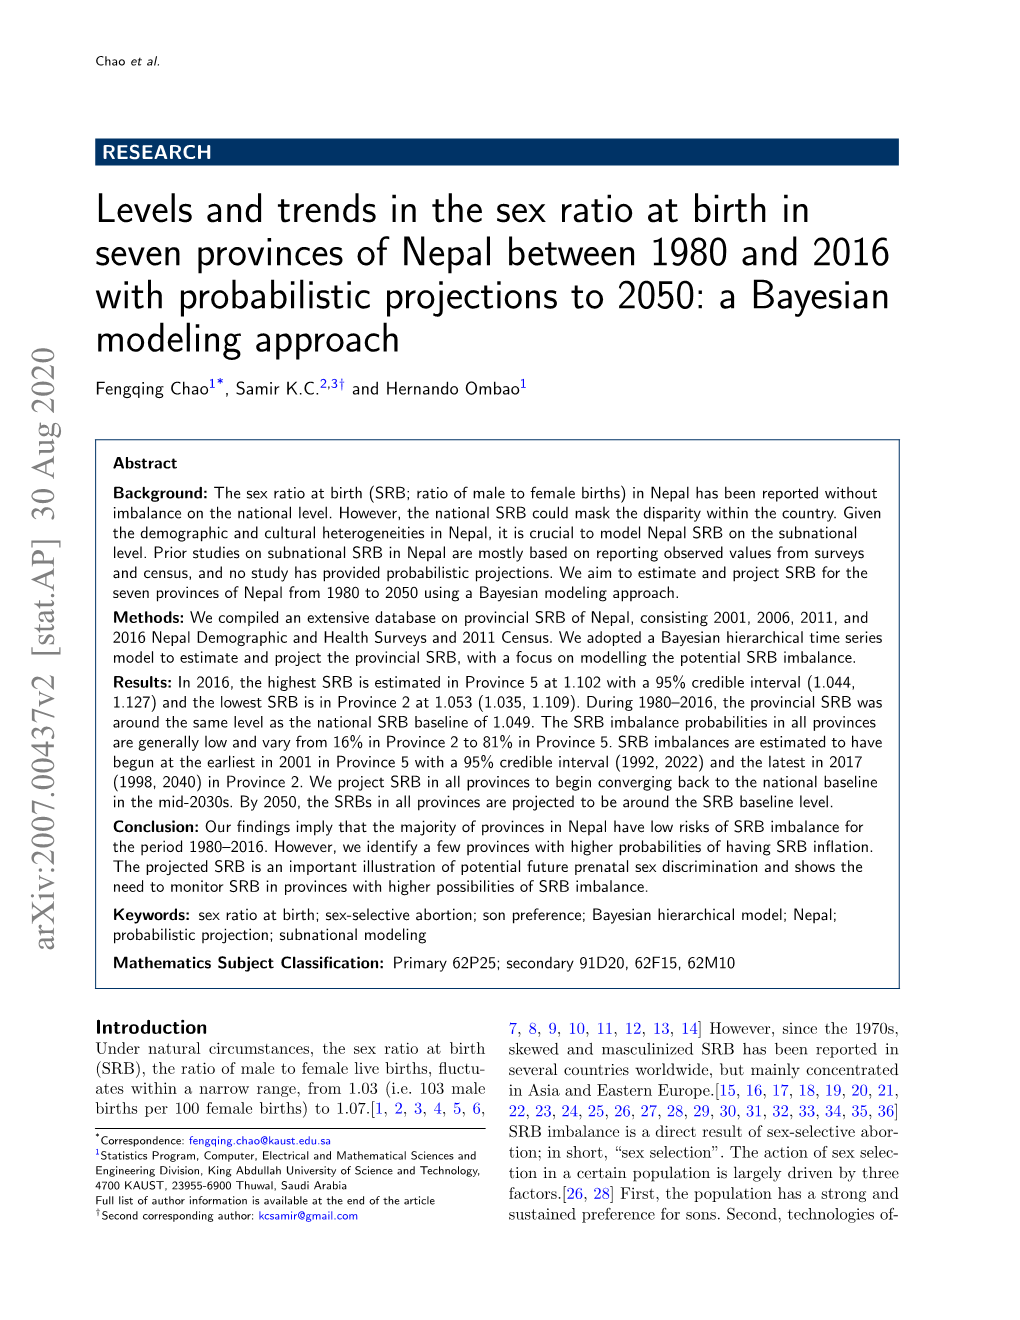 Levels and Trends in the Sex Ratio at Birth in Seven Provinces of Nepal Between 1980 and 2016 with Probabilistic Projections to 2050: a Bayesian Modeling Approach